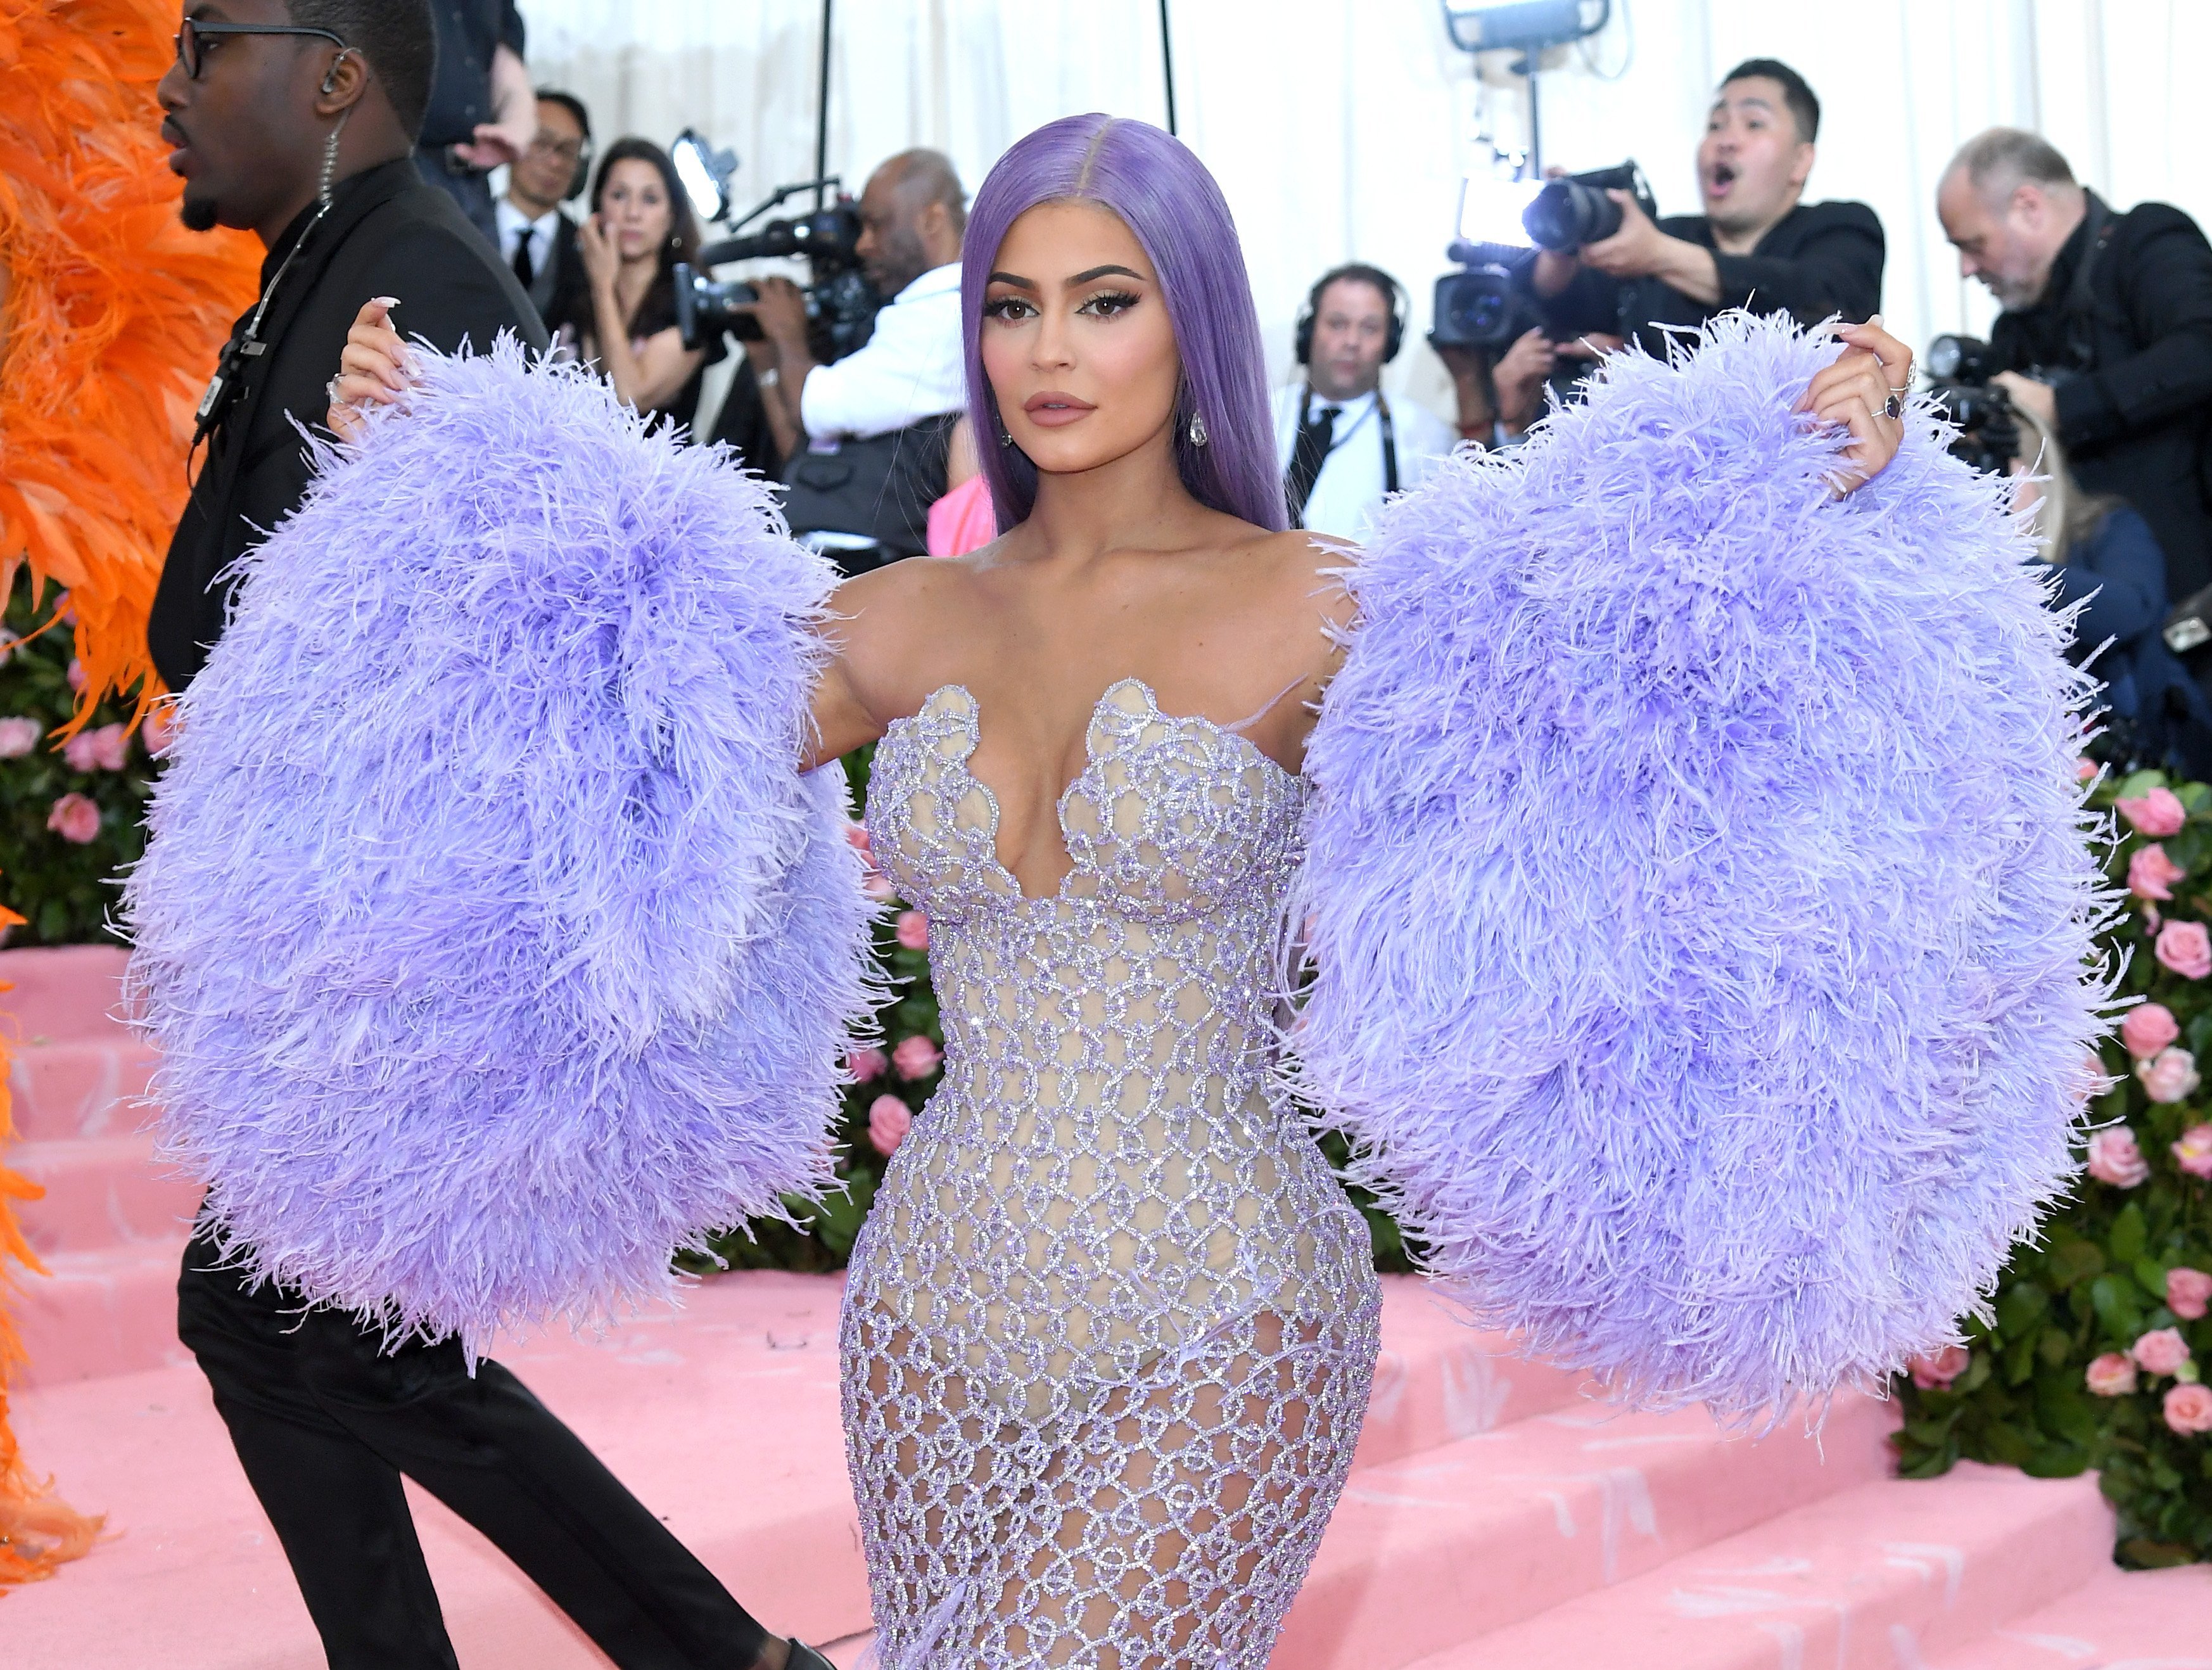 Kylie Jenner's iconic look by Versace at the 2019 Met Gala in May. | Photo: Getty Images